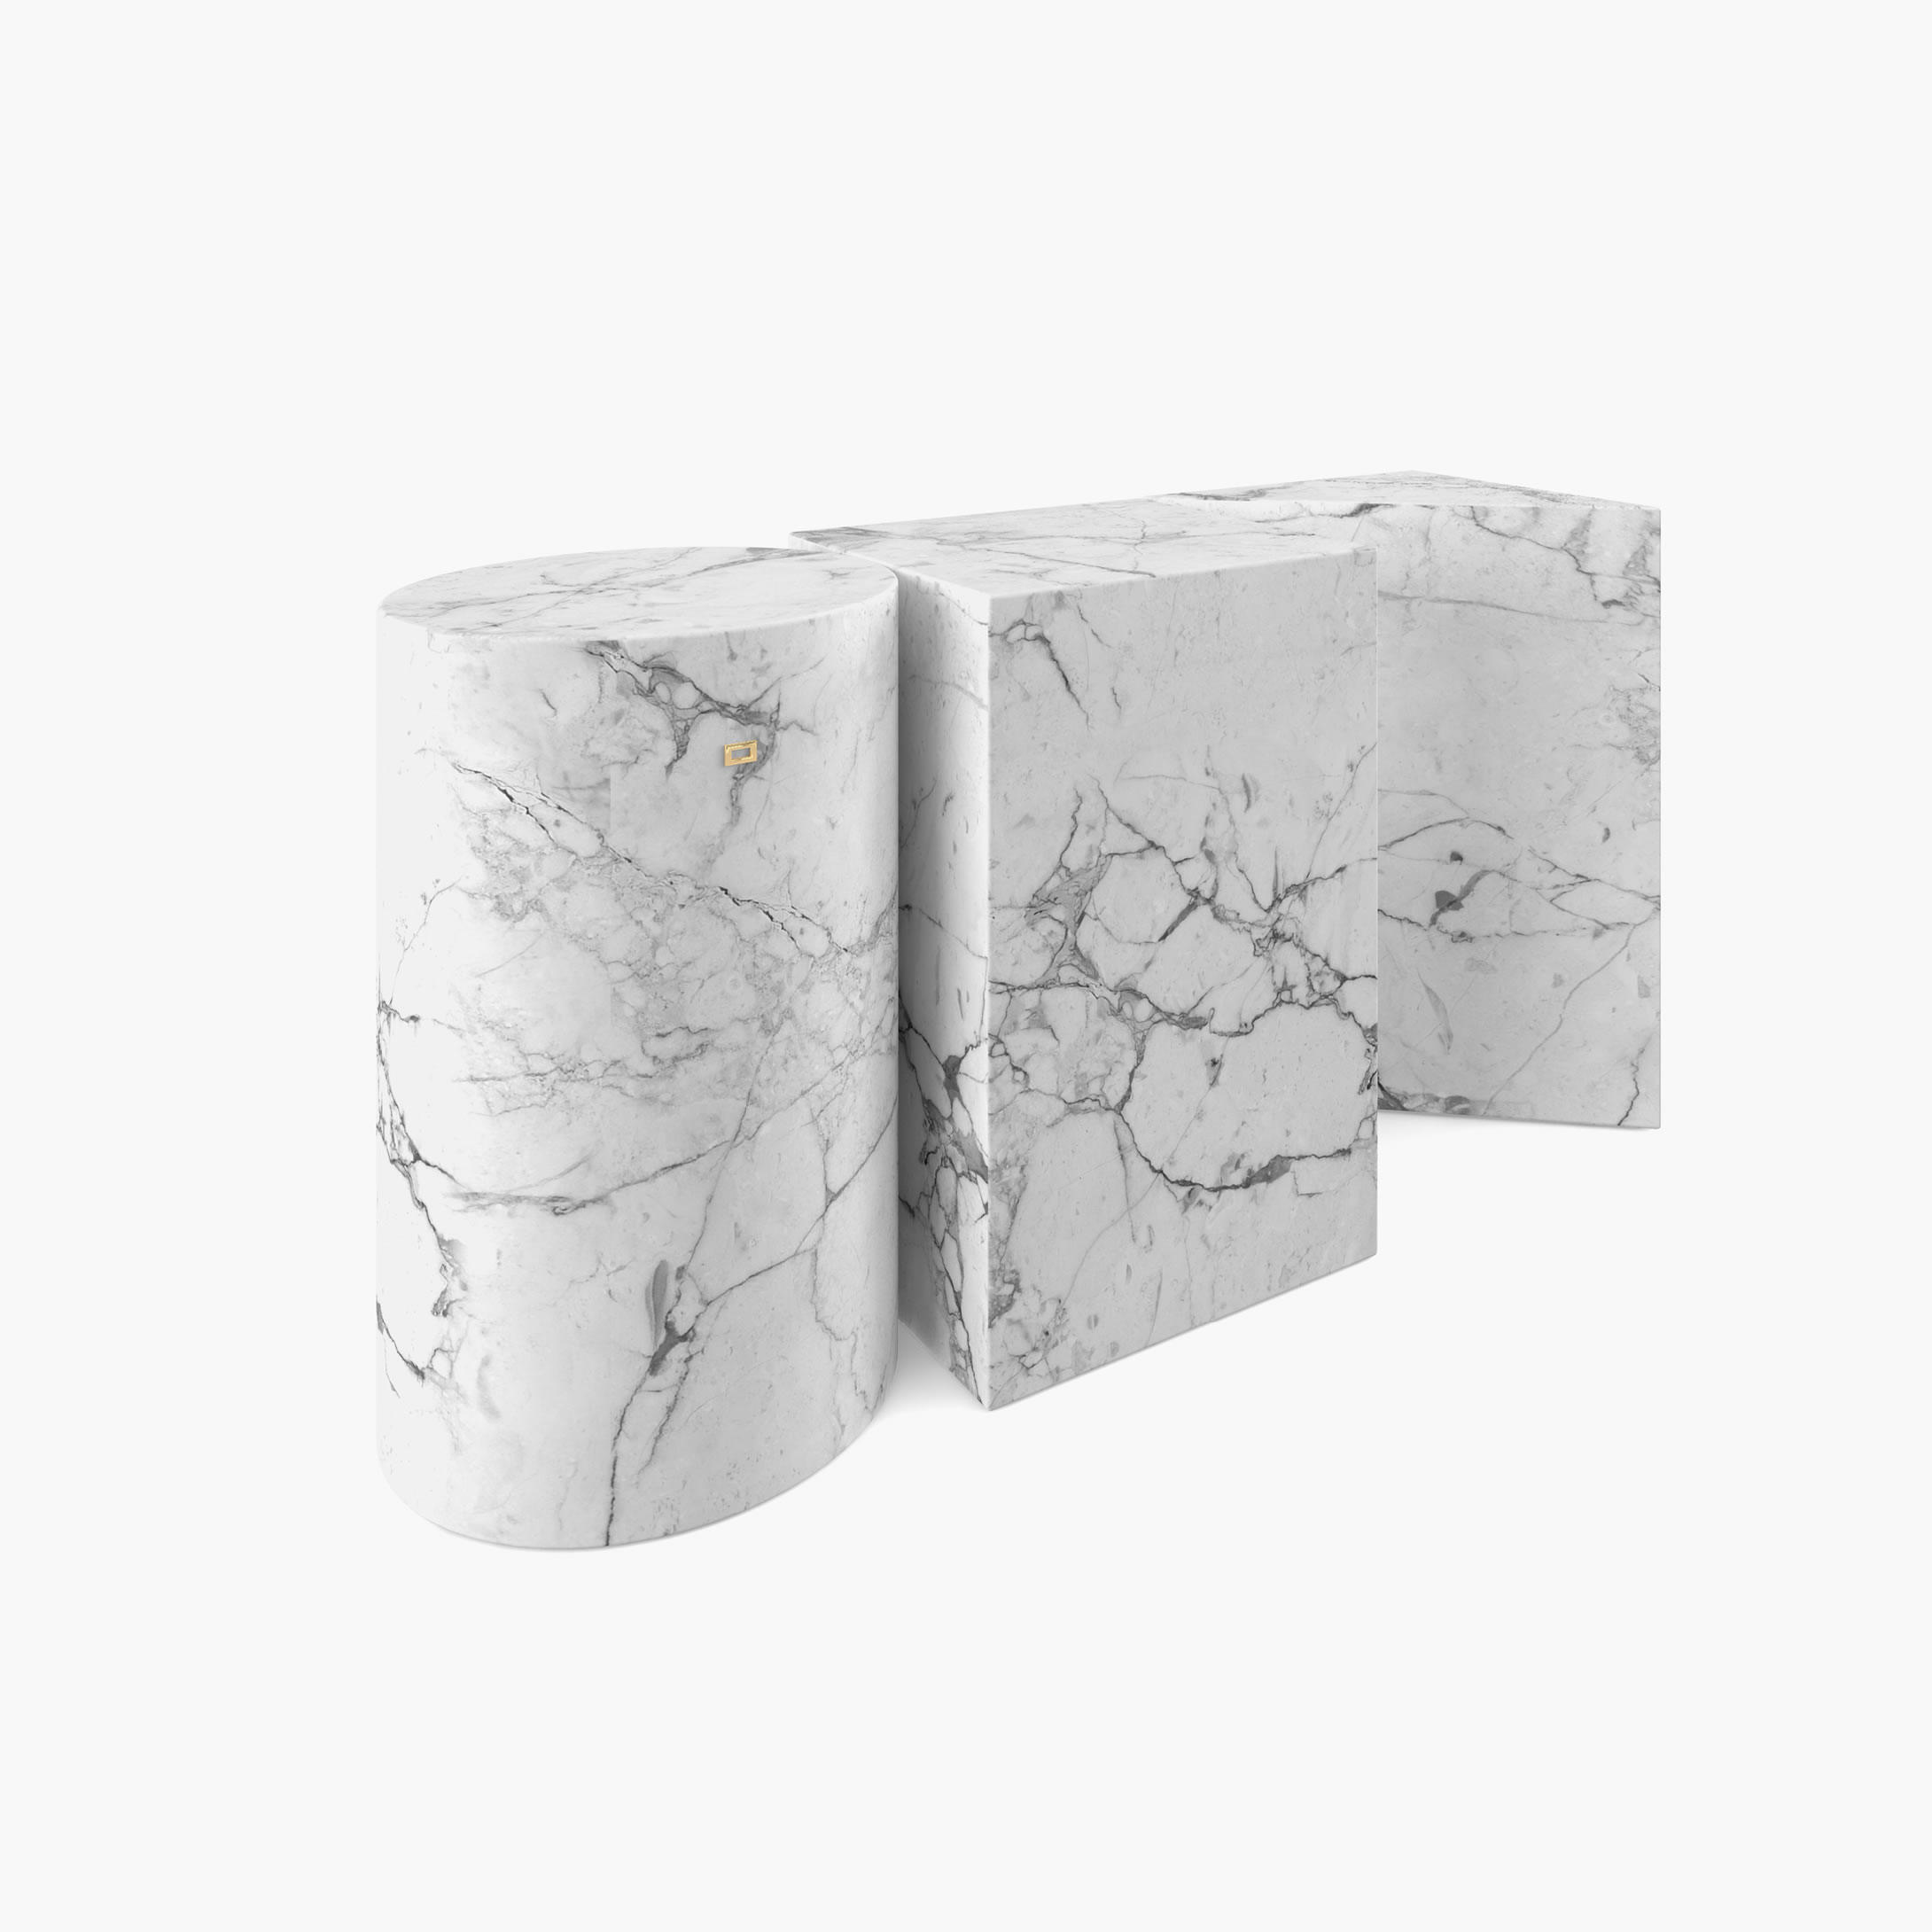 Side Table Cylinder cuboid prism White Arabescato Marble iconic Living Room modern art Side Tables FS 1 FELIX SCHWAKE